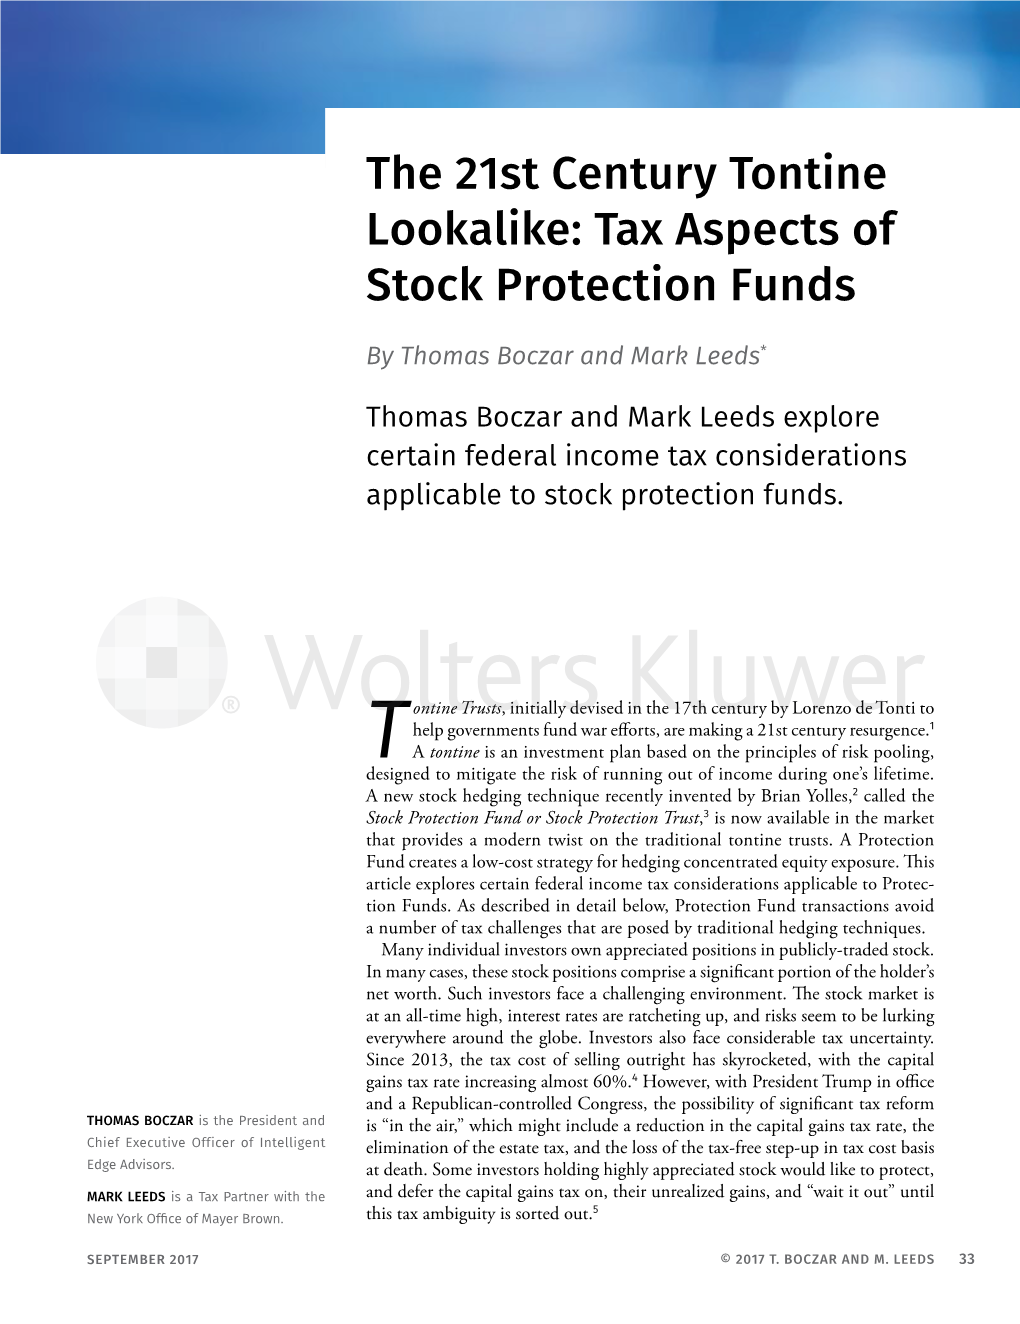 The 21St Century Tontine Lookalike: Tax Aspects of Stock Protection Funds